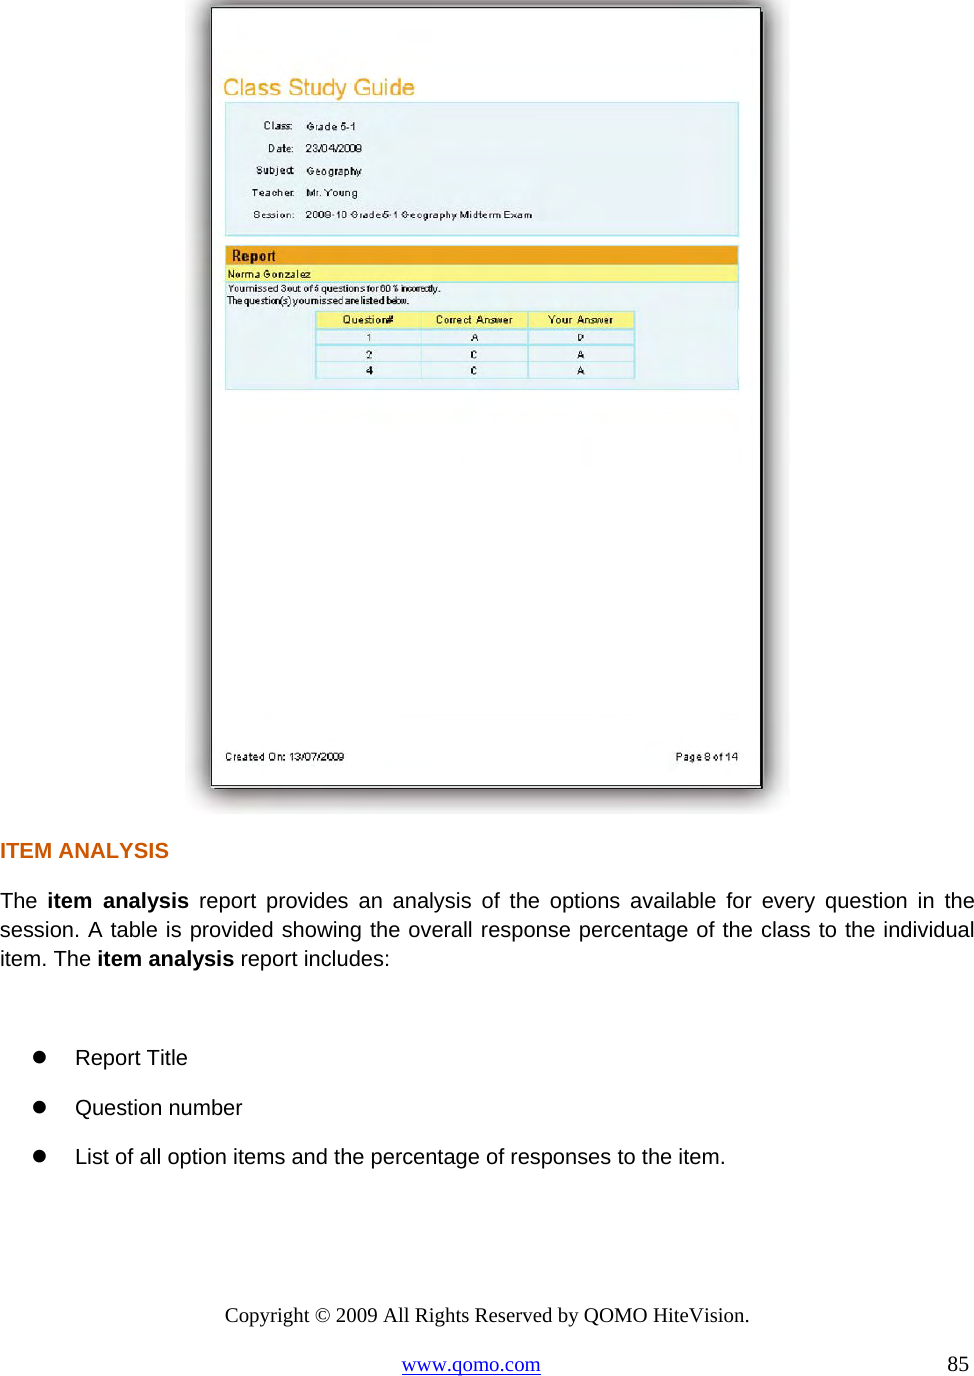 Copyright © 2009 All Rights Reserved by QOMO HiteVision. www.qomo.com                                                                          85   ITEM ANALYSIS The  item analysis report provides an analysis of the options available for every question in the session. A table is provided showing the overall response percentage of the class to the individual item. The item analysis report includes:    Report Title   Question number   List of all option items and the percentage of responses to the item. 